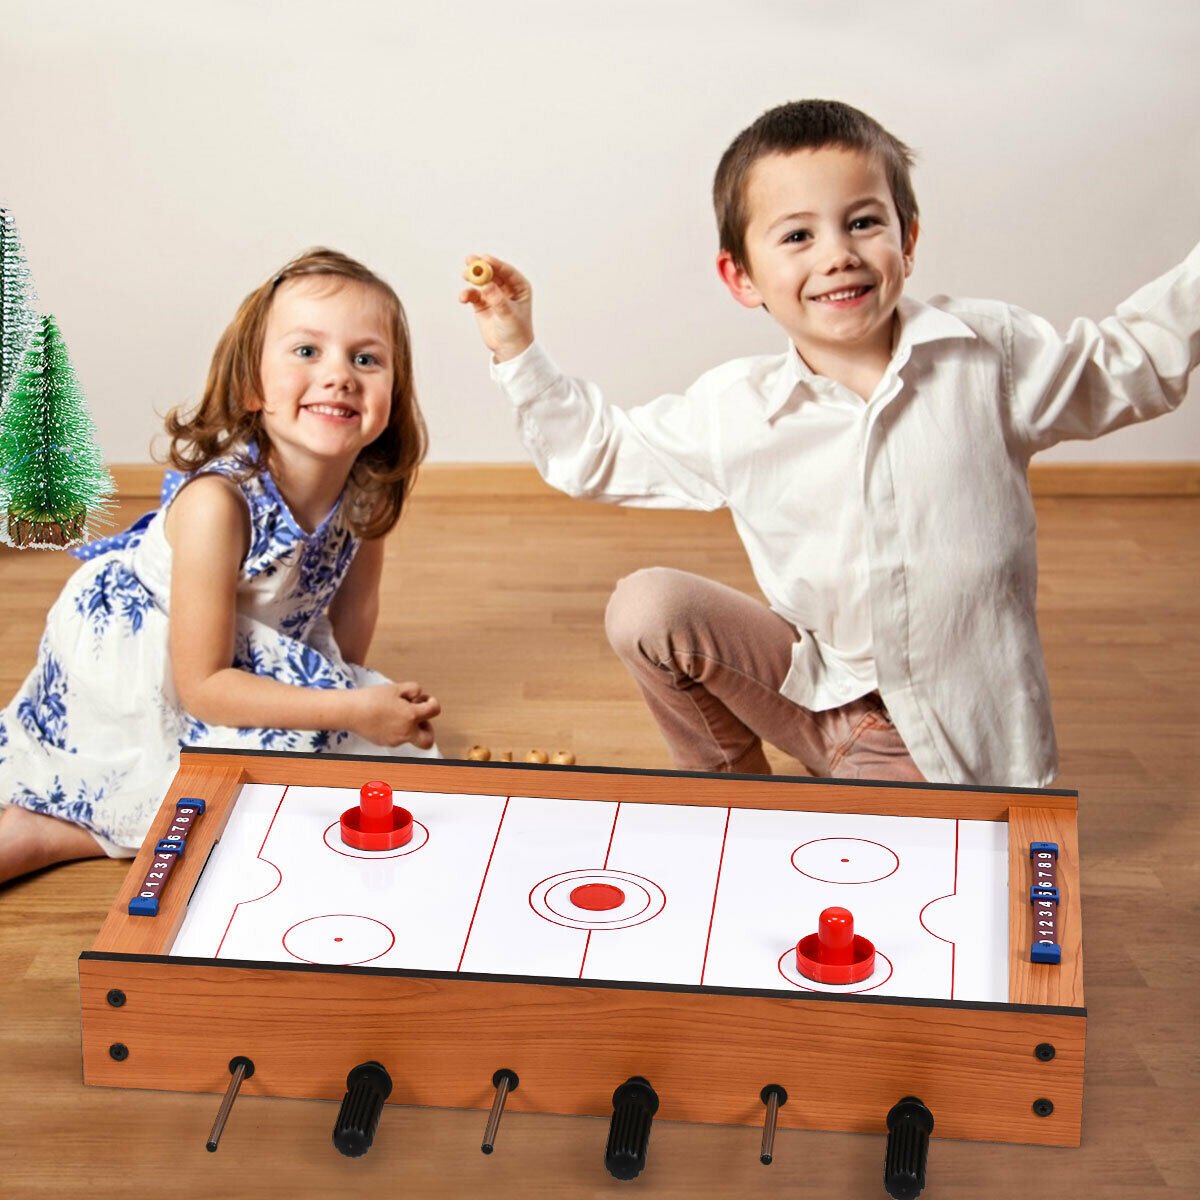 Kick Off the Fun with Our 2-in-1 Game Set - Shop Now!